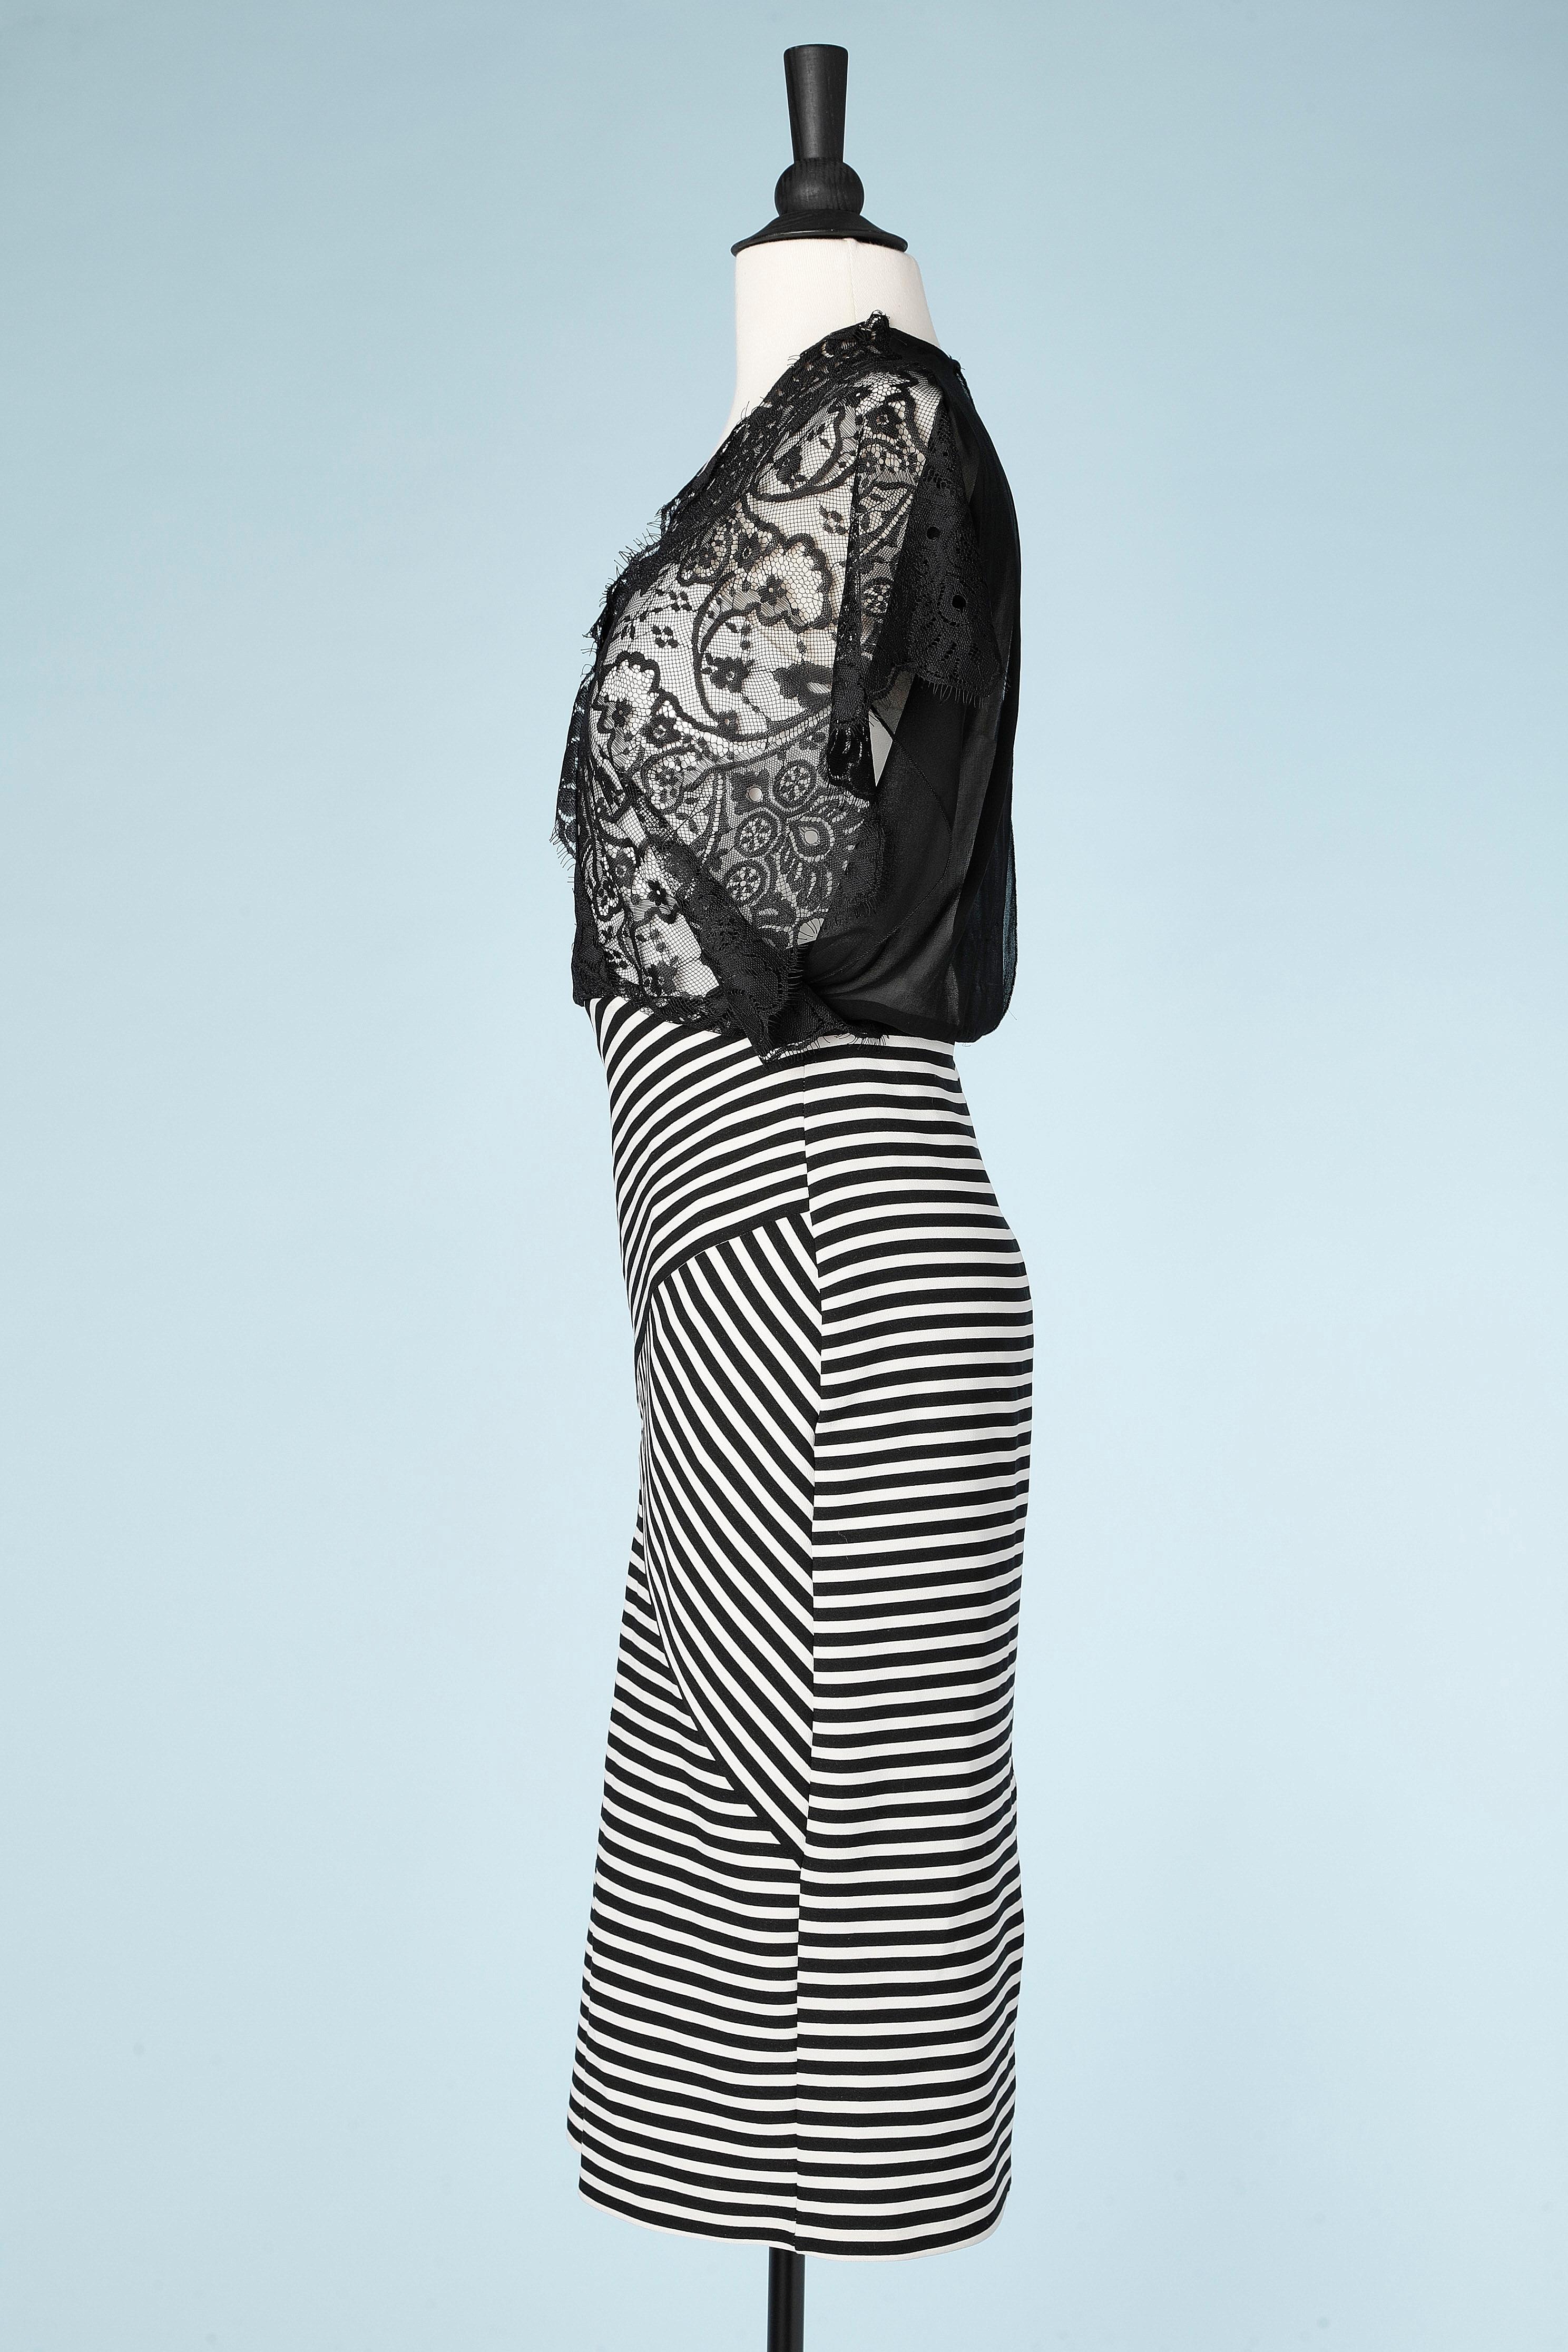 Women's Cocktail dress in lace and black&white striped skirt Roméo Gigli 